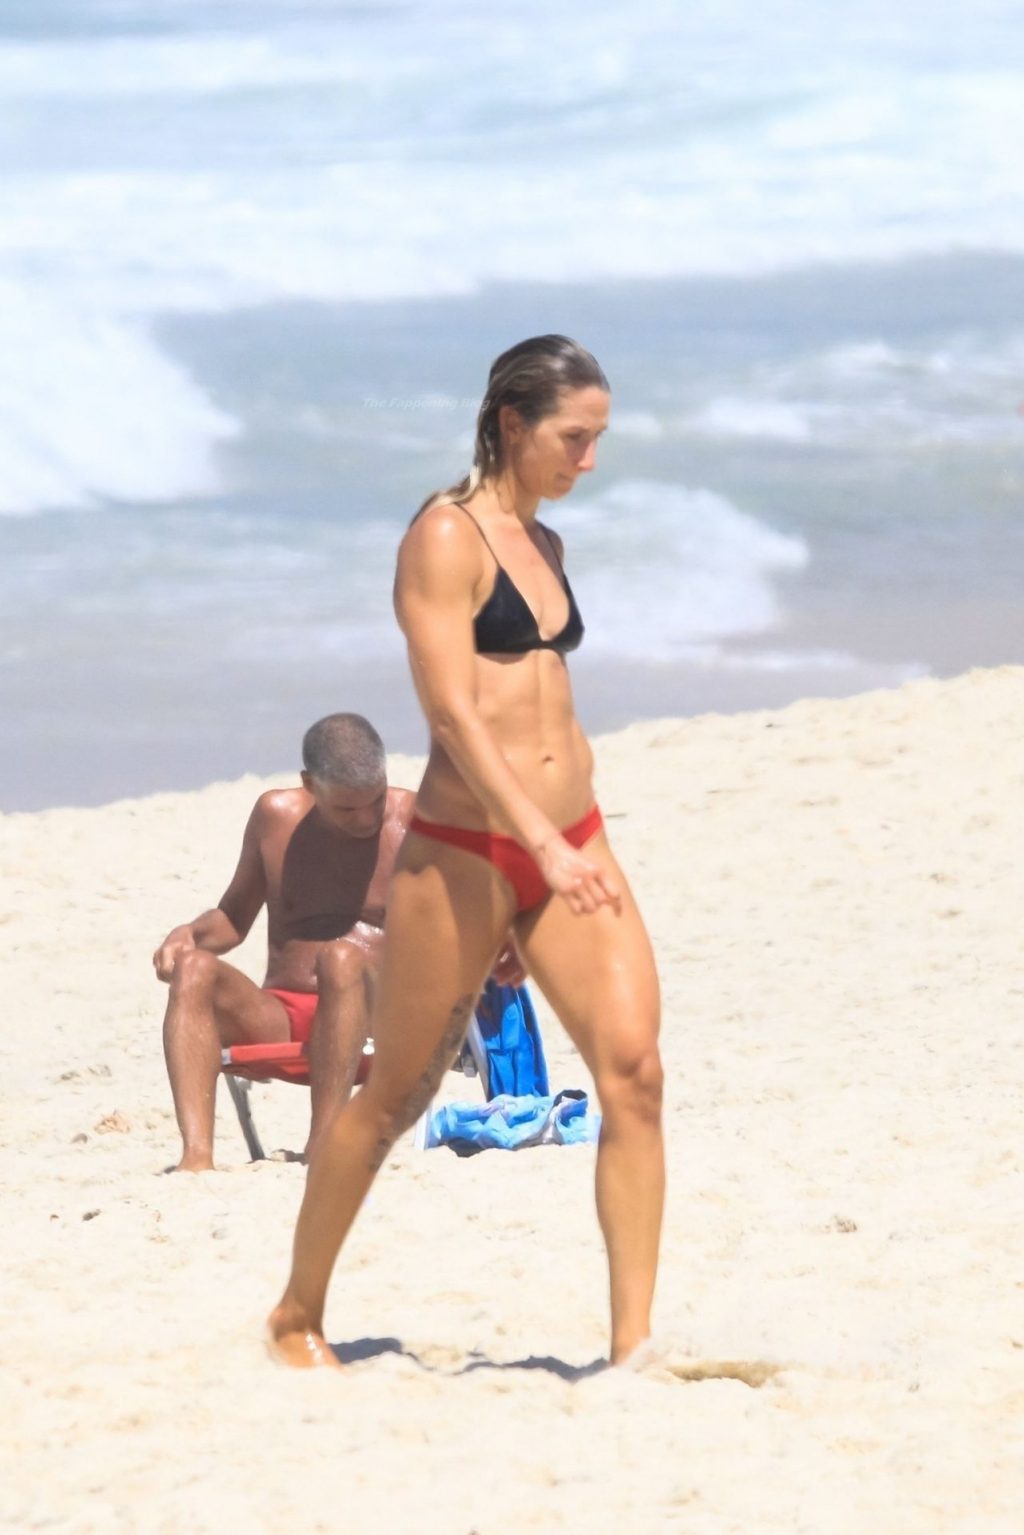 Brandie Wilkerson &amp; Heather Bansley Are Seen on the Beach in Rio (108 Photos)